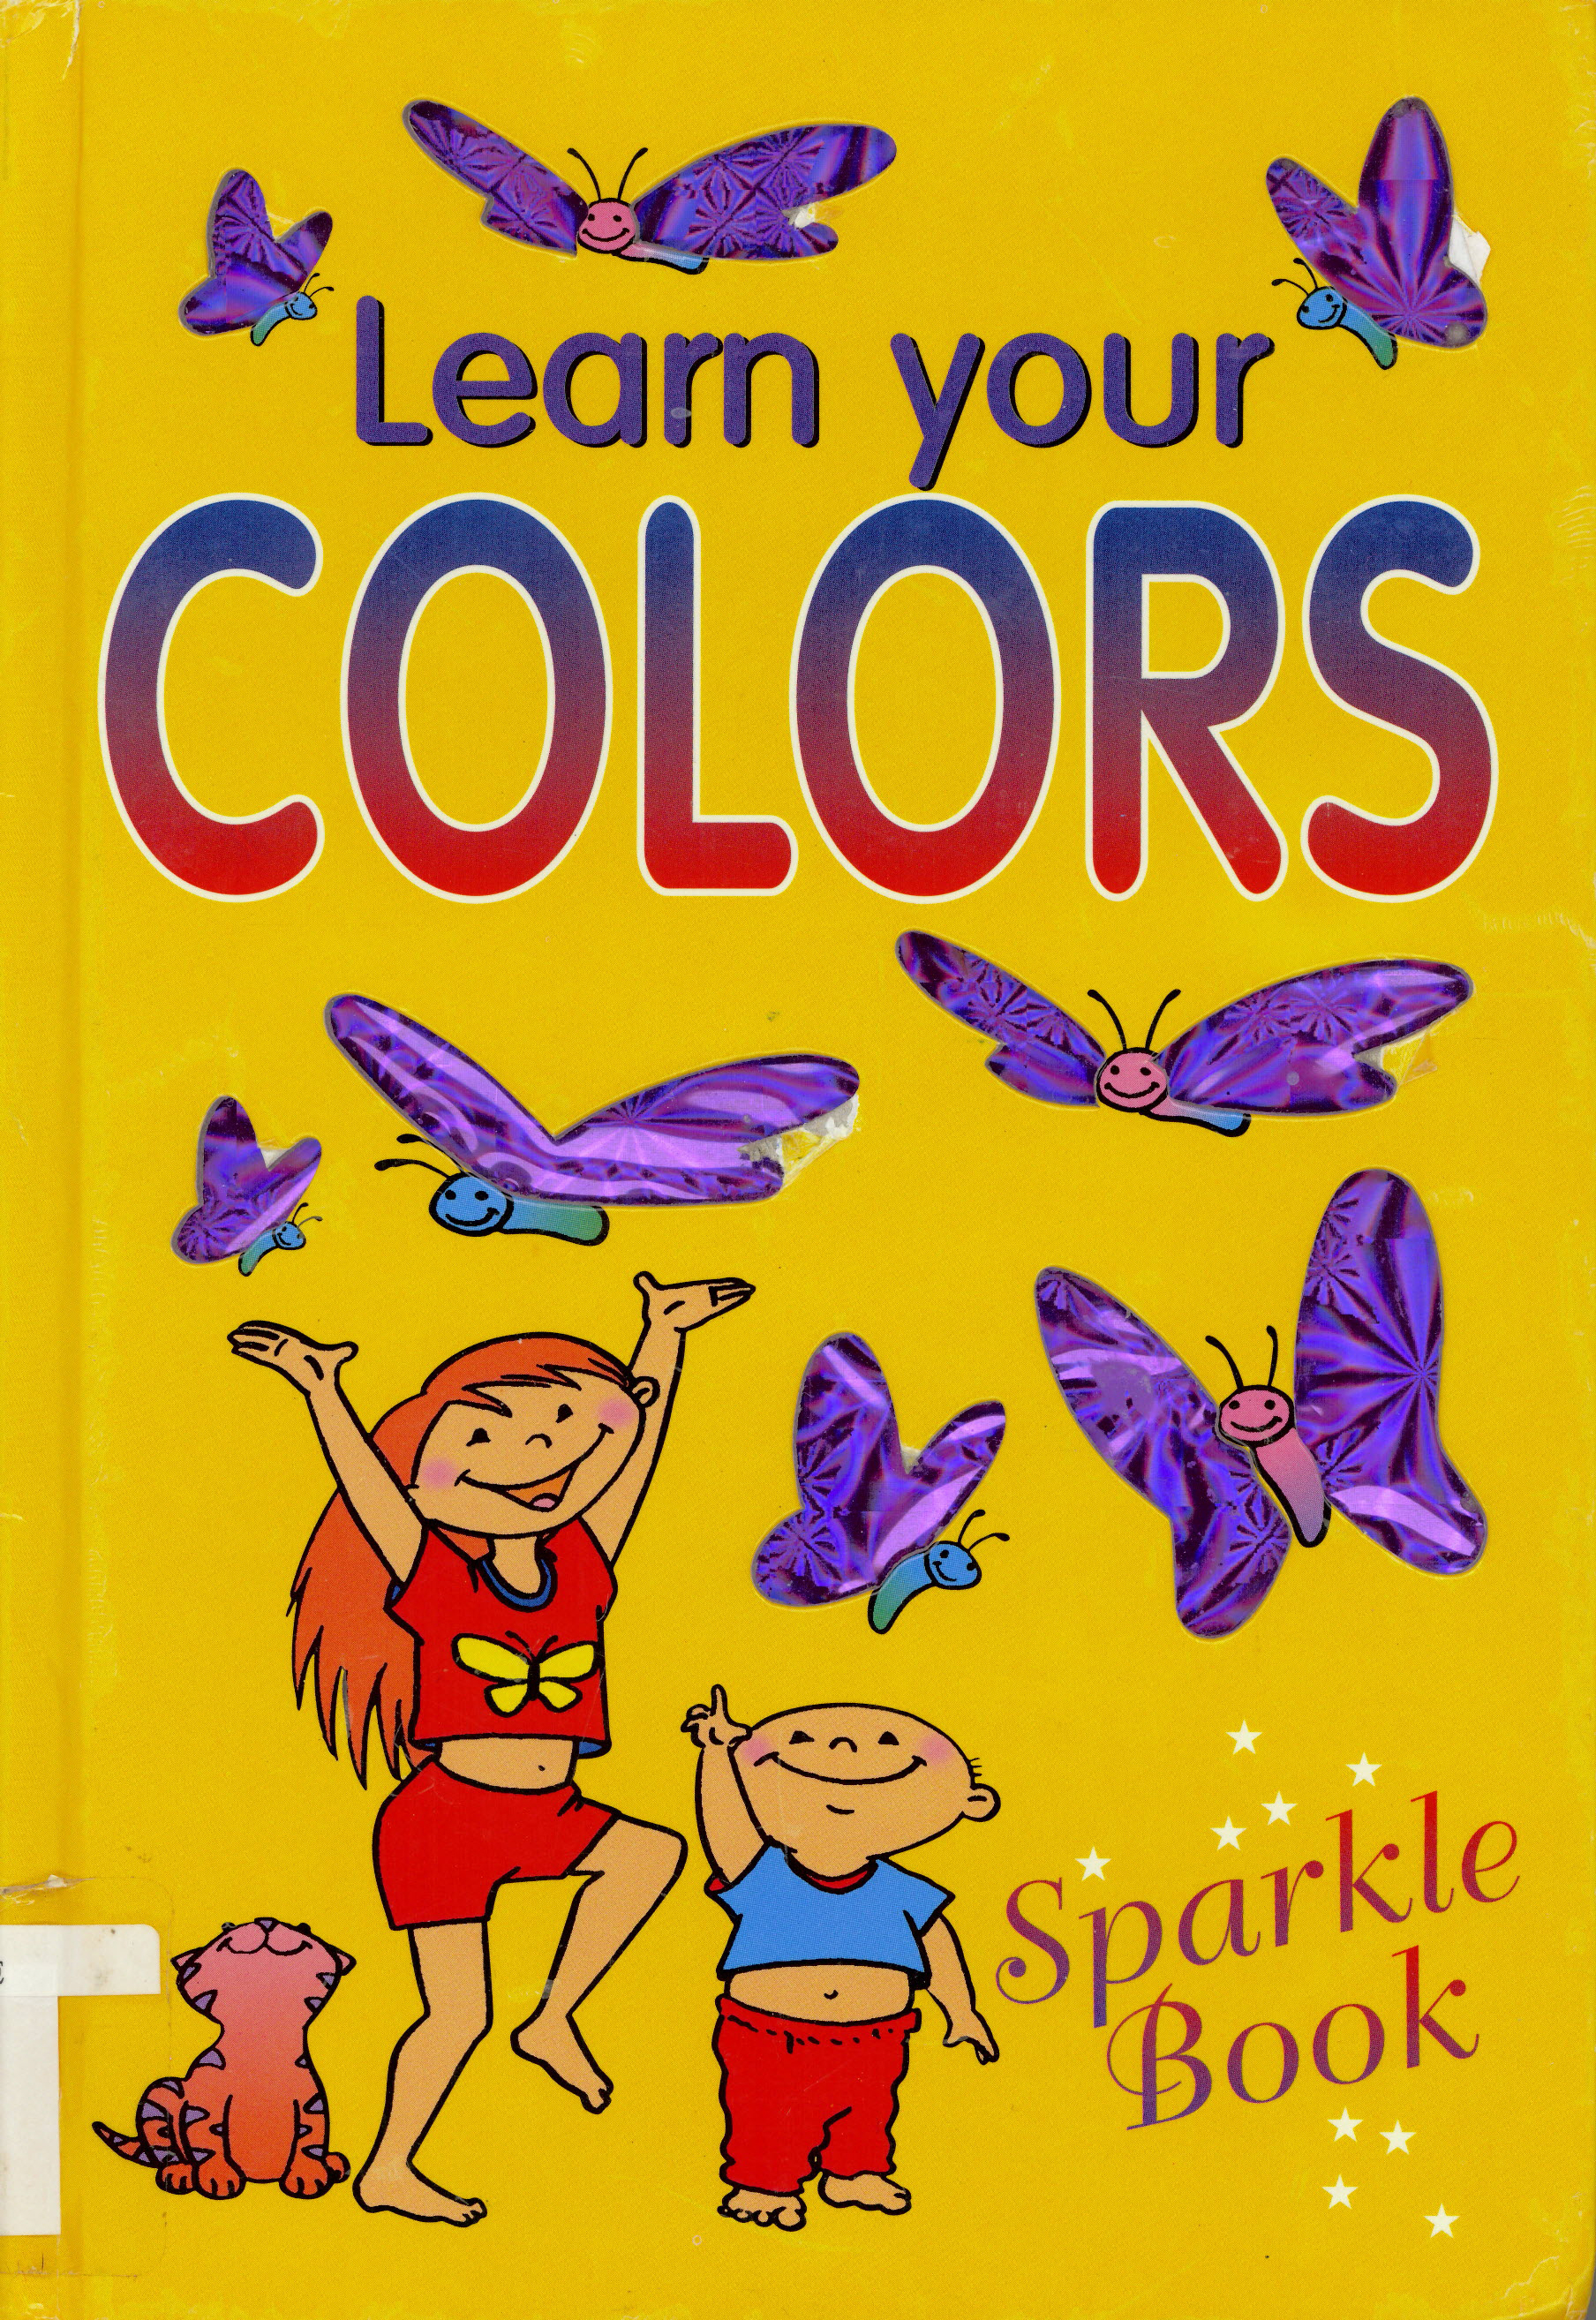 Learn your colors : sparkle book